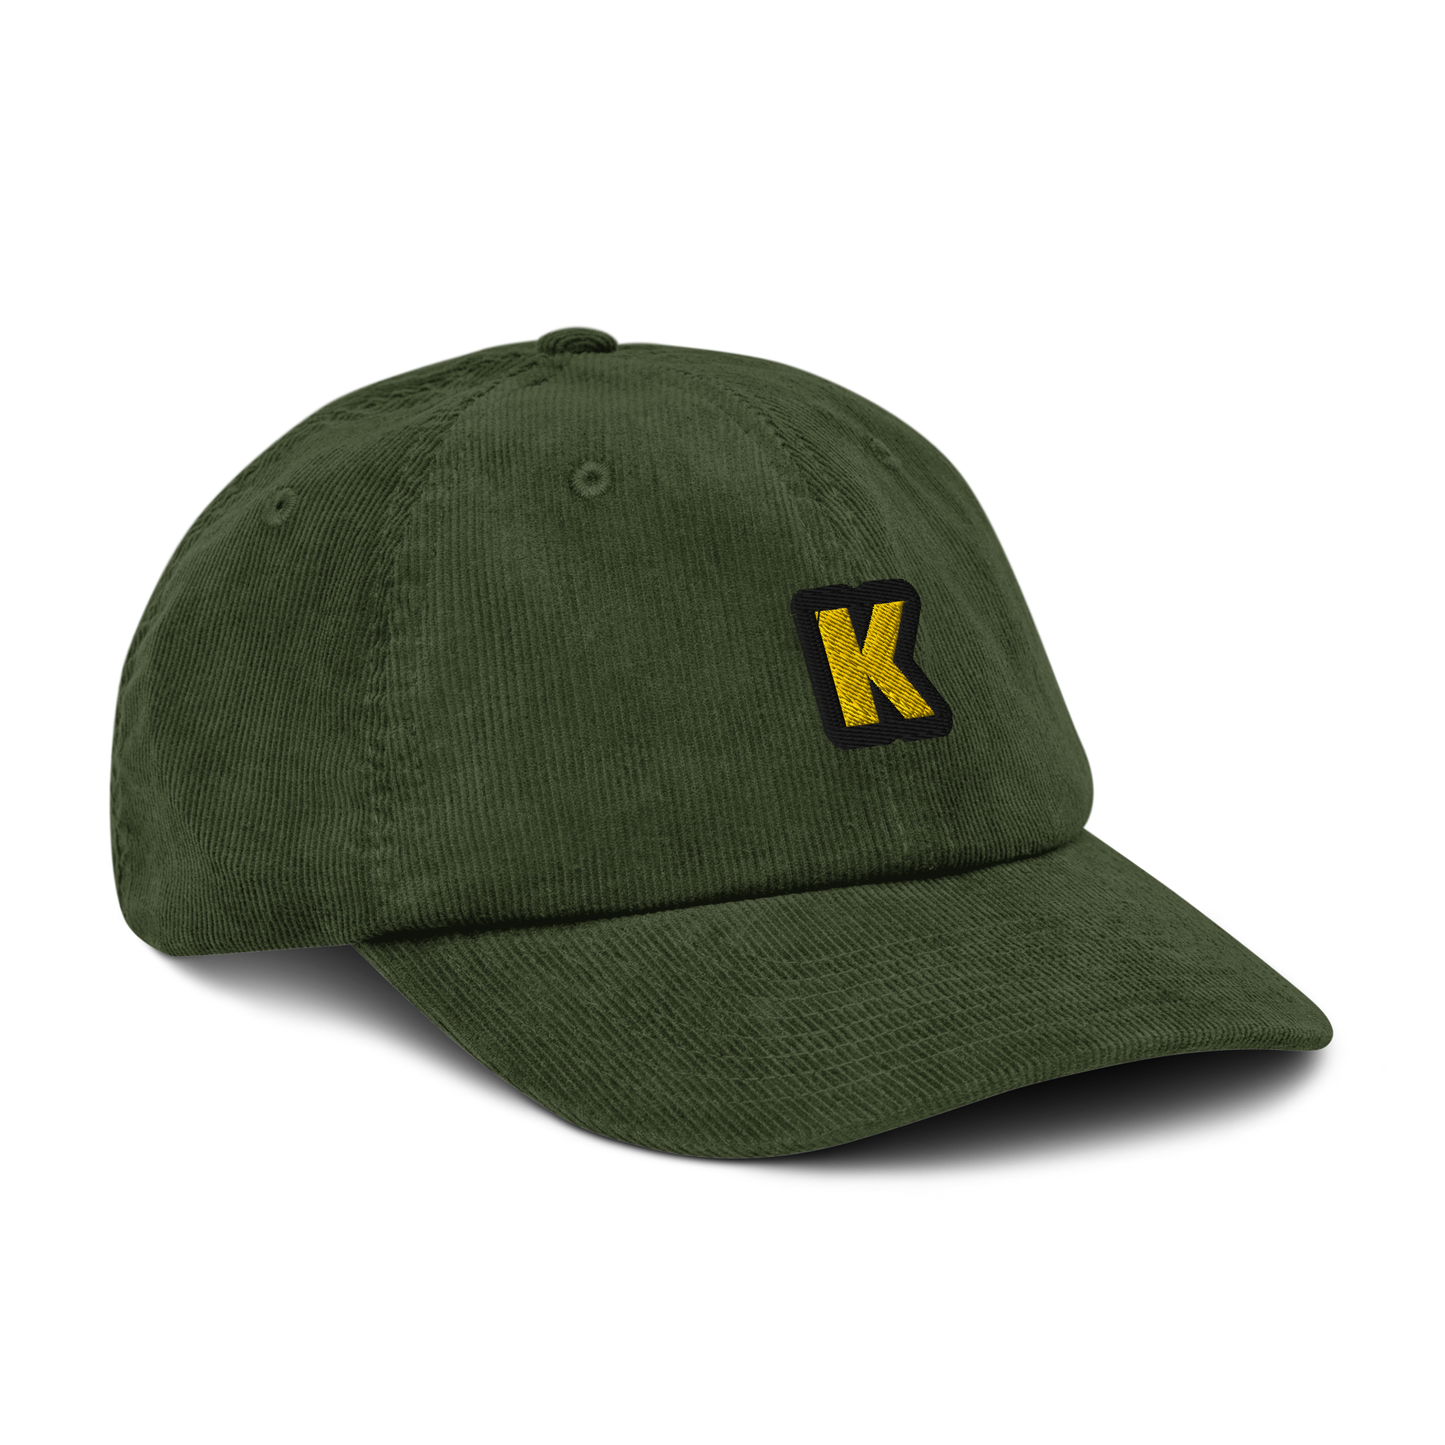 K - The letter collection - Corduroy hat